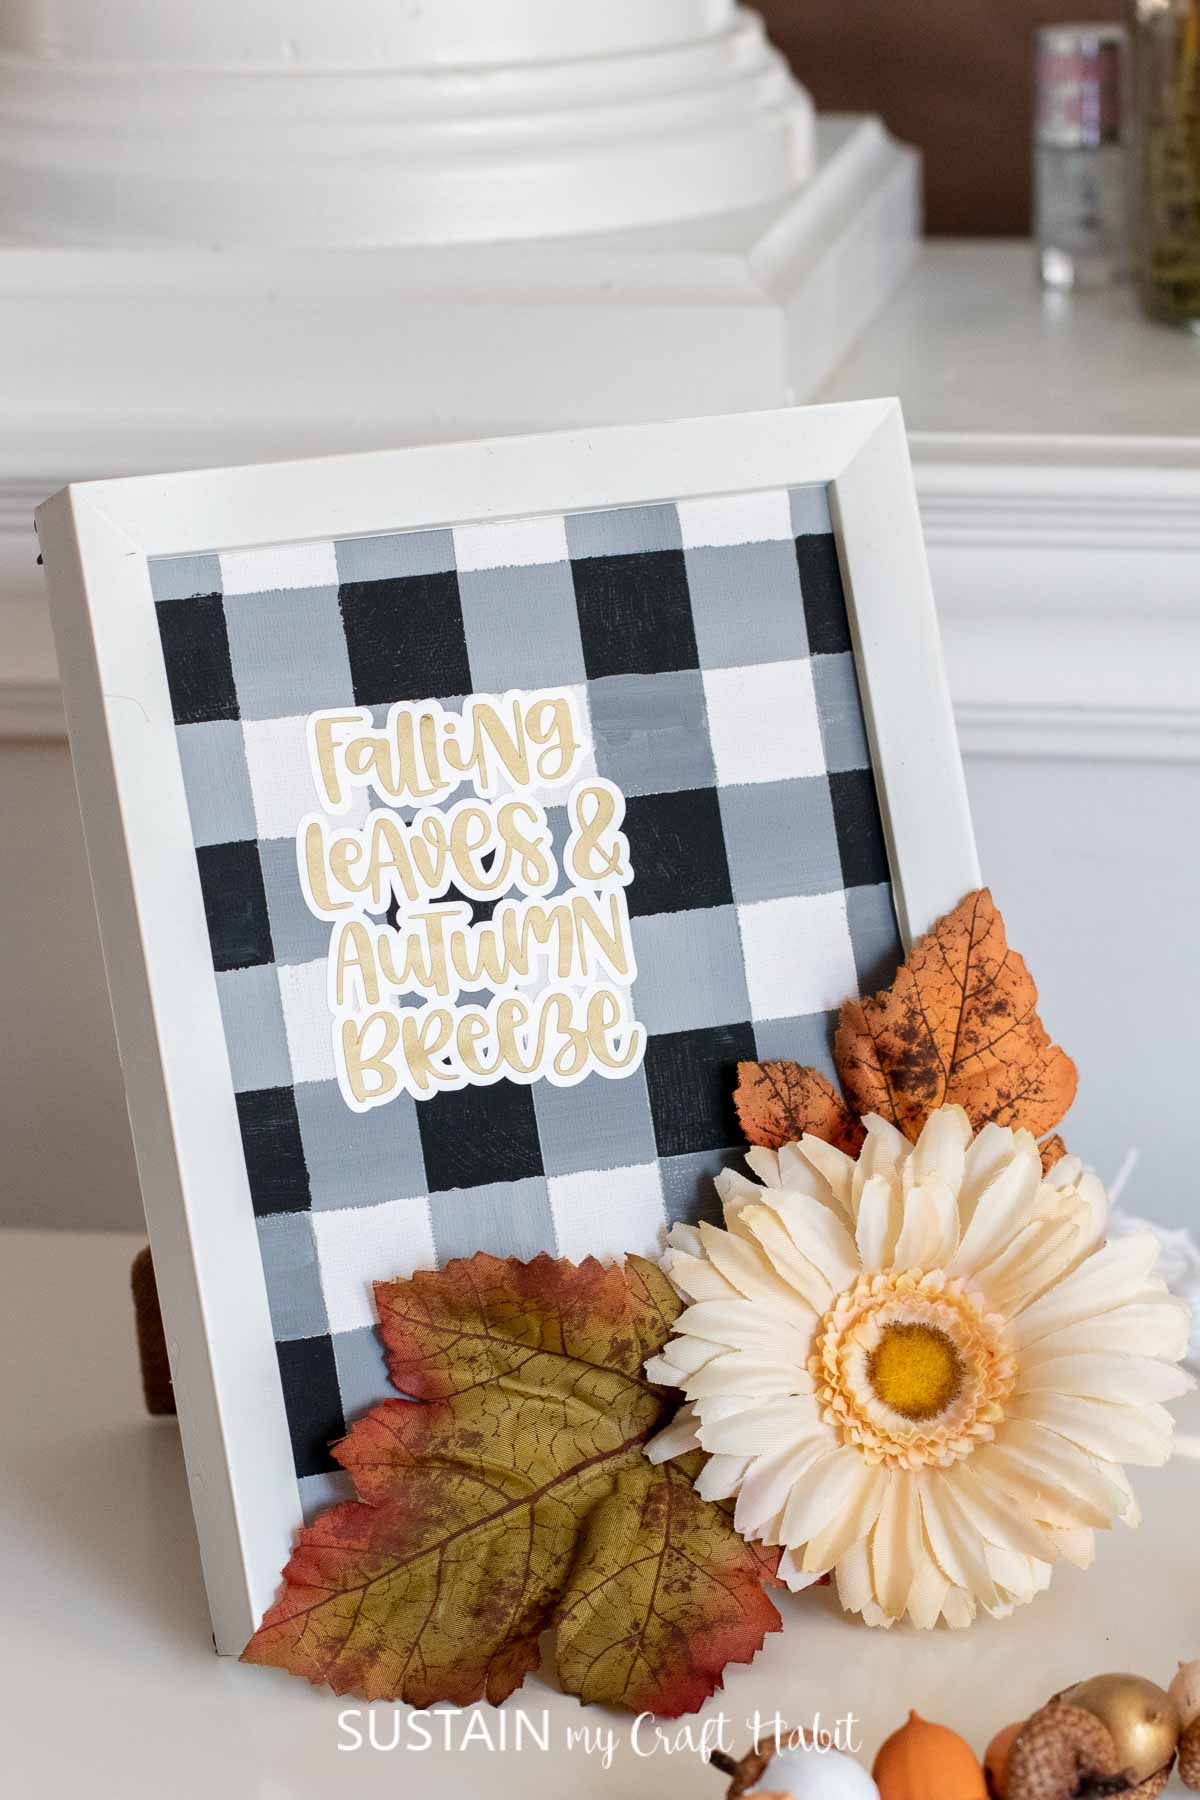 Painted buffalo plaid pattern in a frame with a "falling leaves and autumn breeze" cut out phrase and faux flowers and leaves.